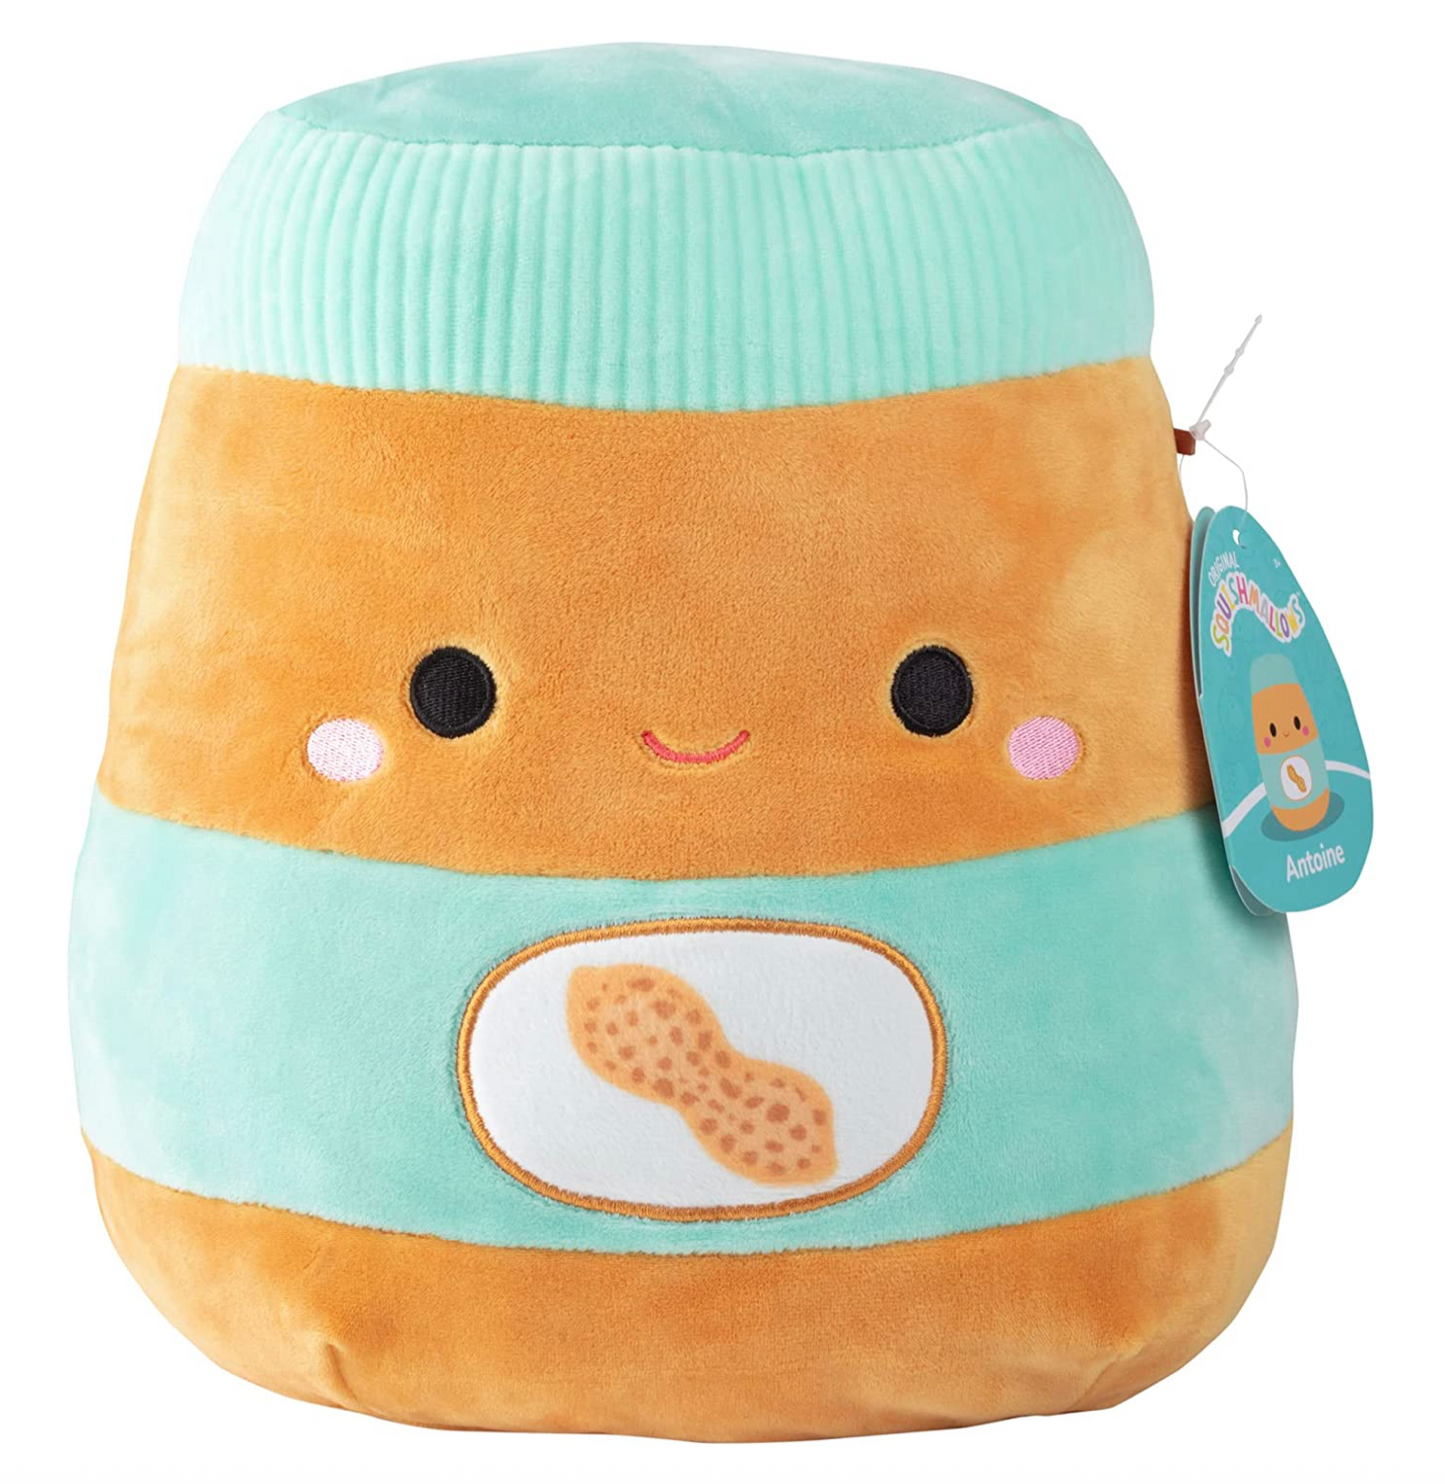 Antoine the Peanut Butter Jar ~ 7.5" inch Squishmallows ~ In Stock!